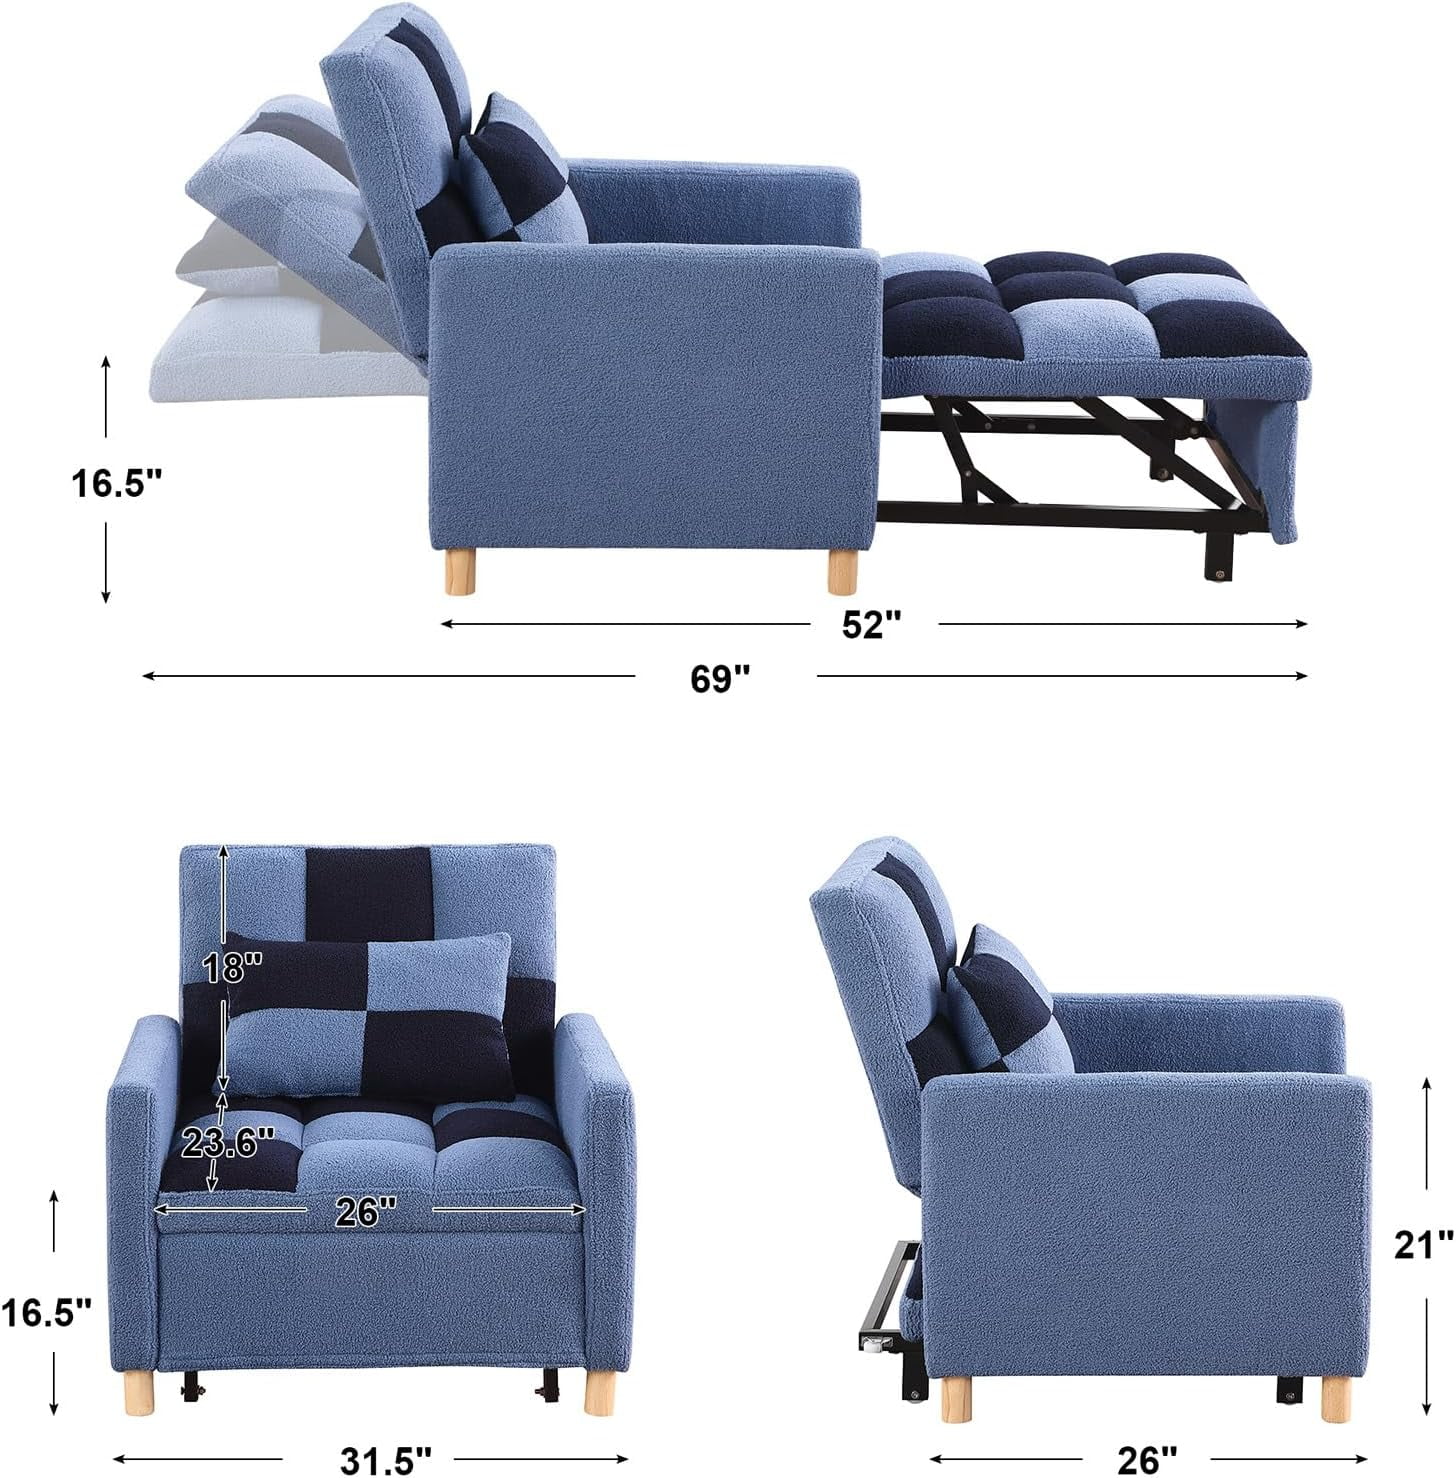 3-in-1 Single Convertible Chair Bed, Plaid Pattern Convertible Sleeper Sofa  Chair Bed, Multi-Functional Pull Out Sleeper Chair Bed, Adjustable Single  Armchair Sofa Bed with Pillow, Blue 